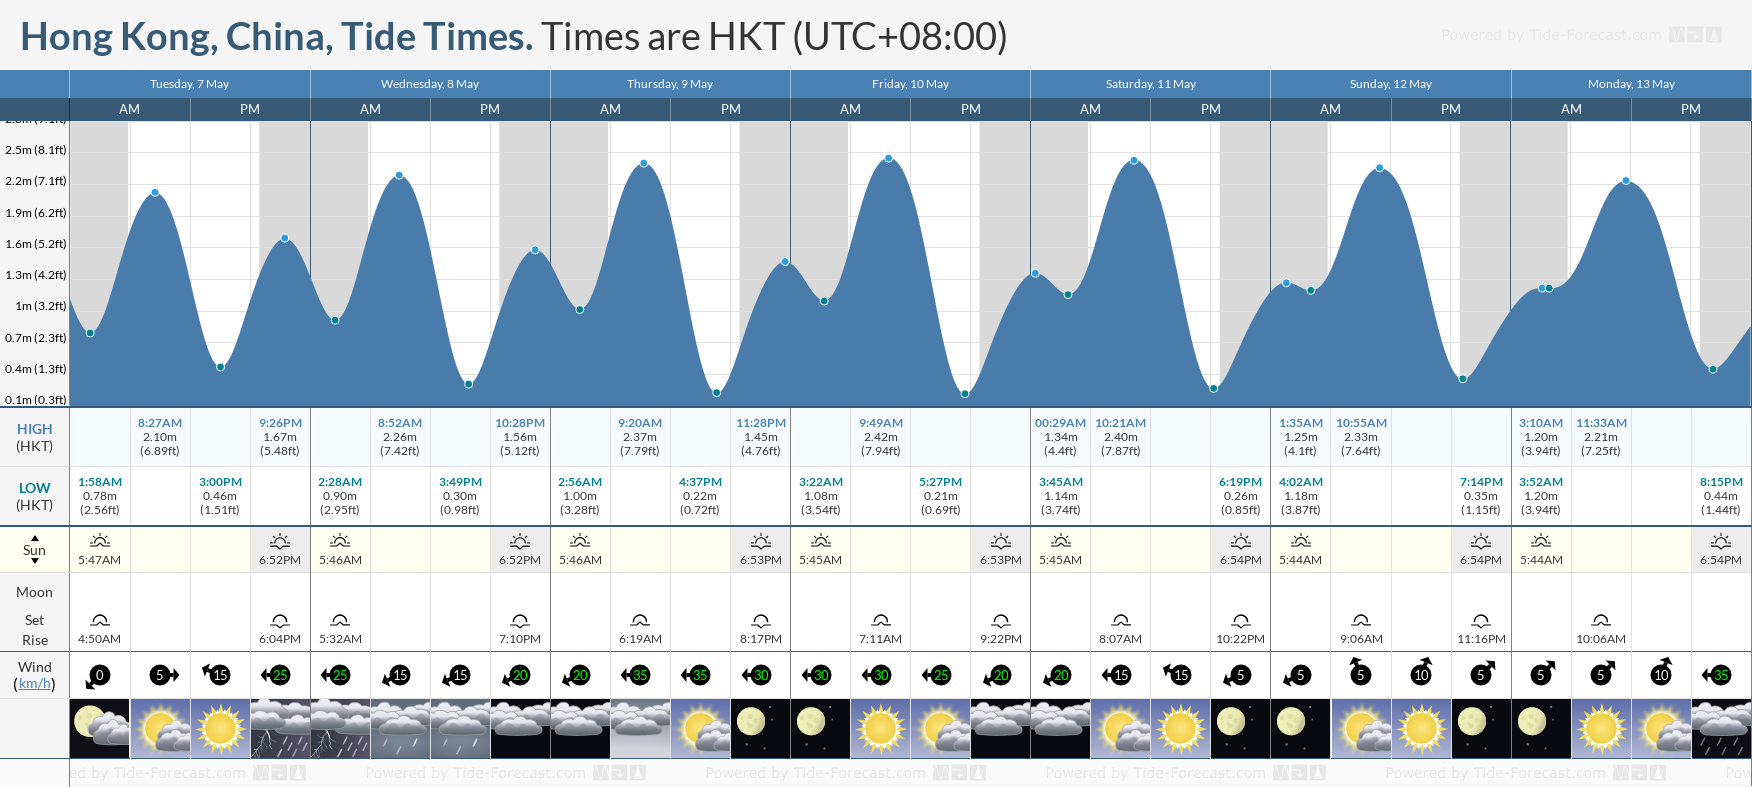 Hong Kong, China Tide Chart including high and low tide times for the next 7 days